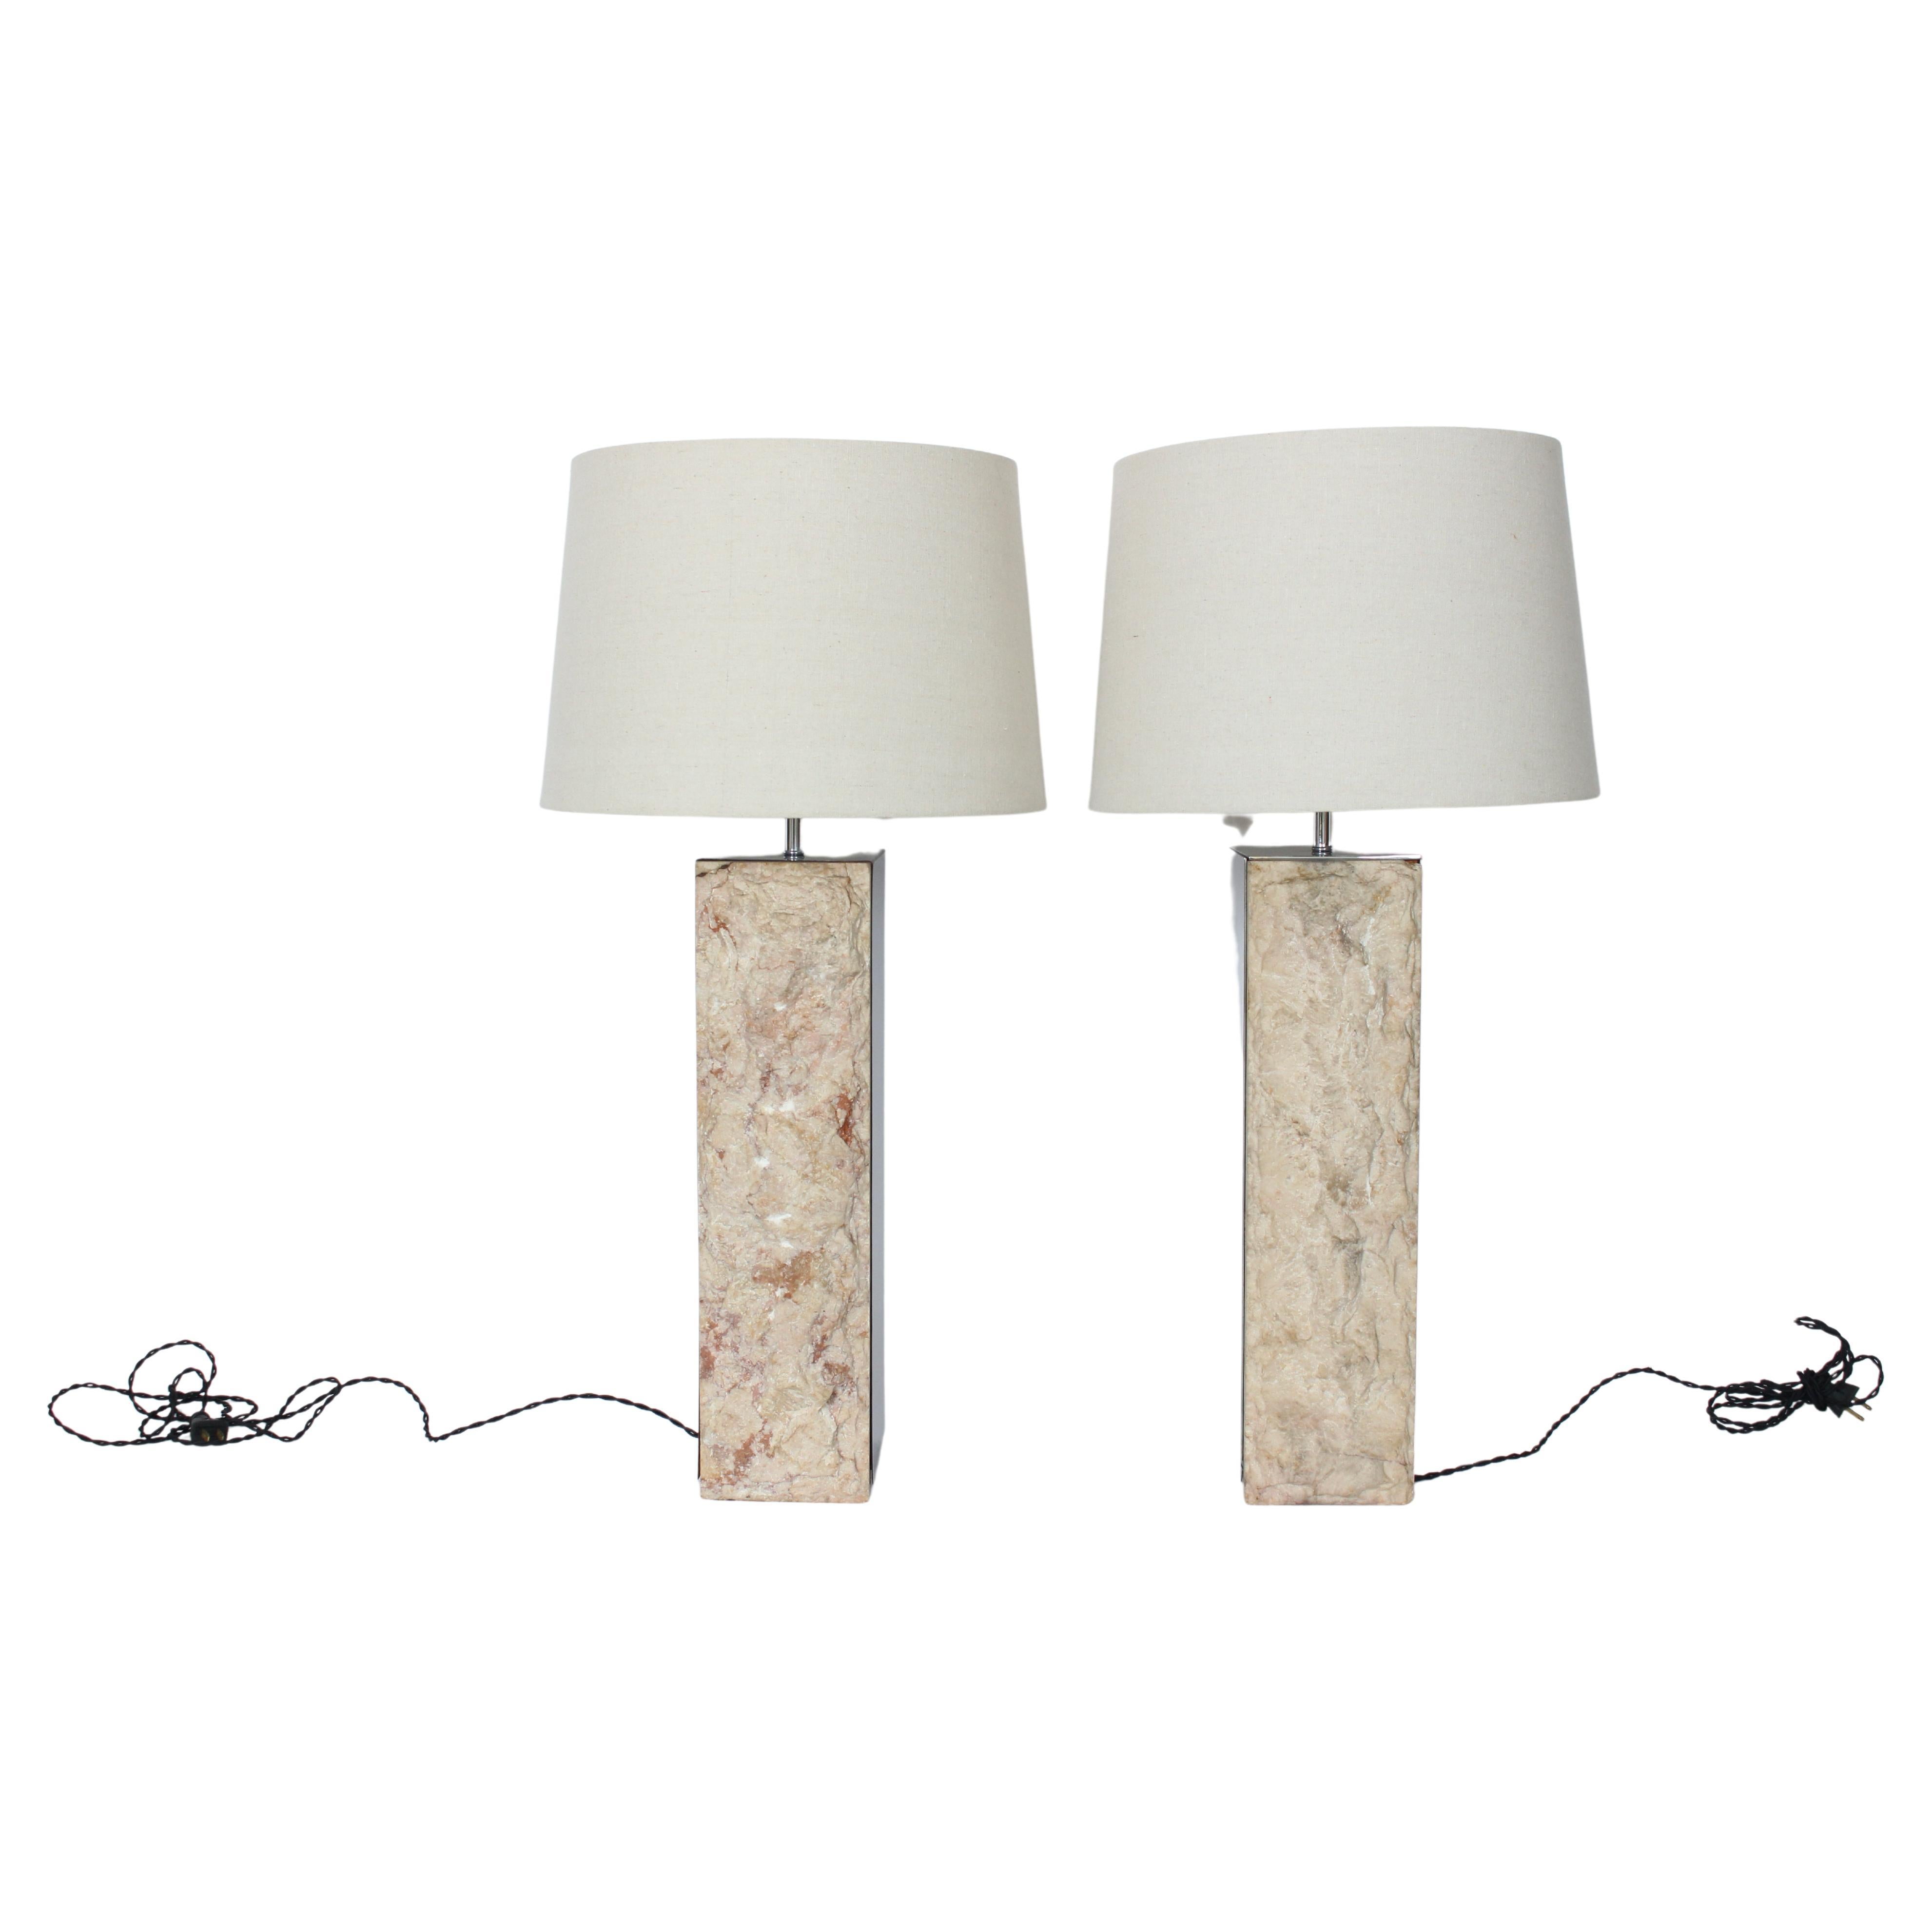 Substantial Pair of Laurel Italian Rough Cut Marble & Polished Metal Table Lamps